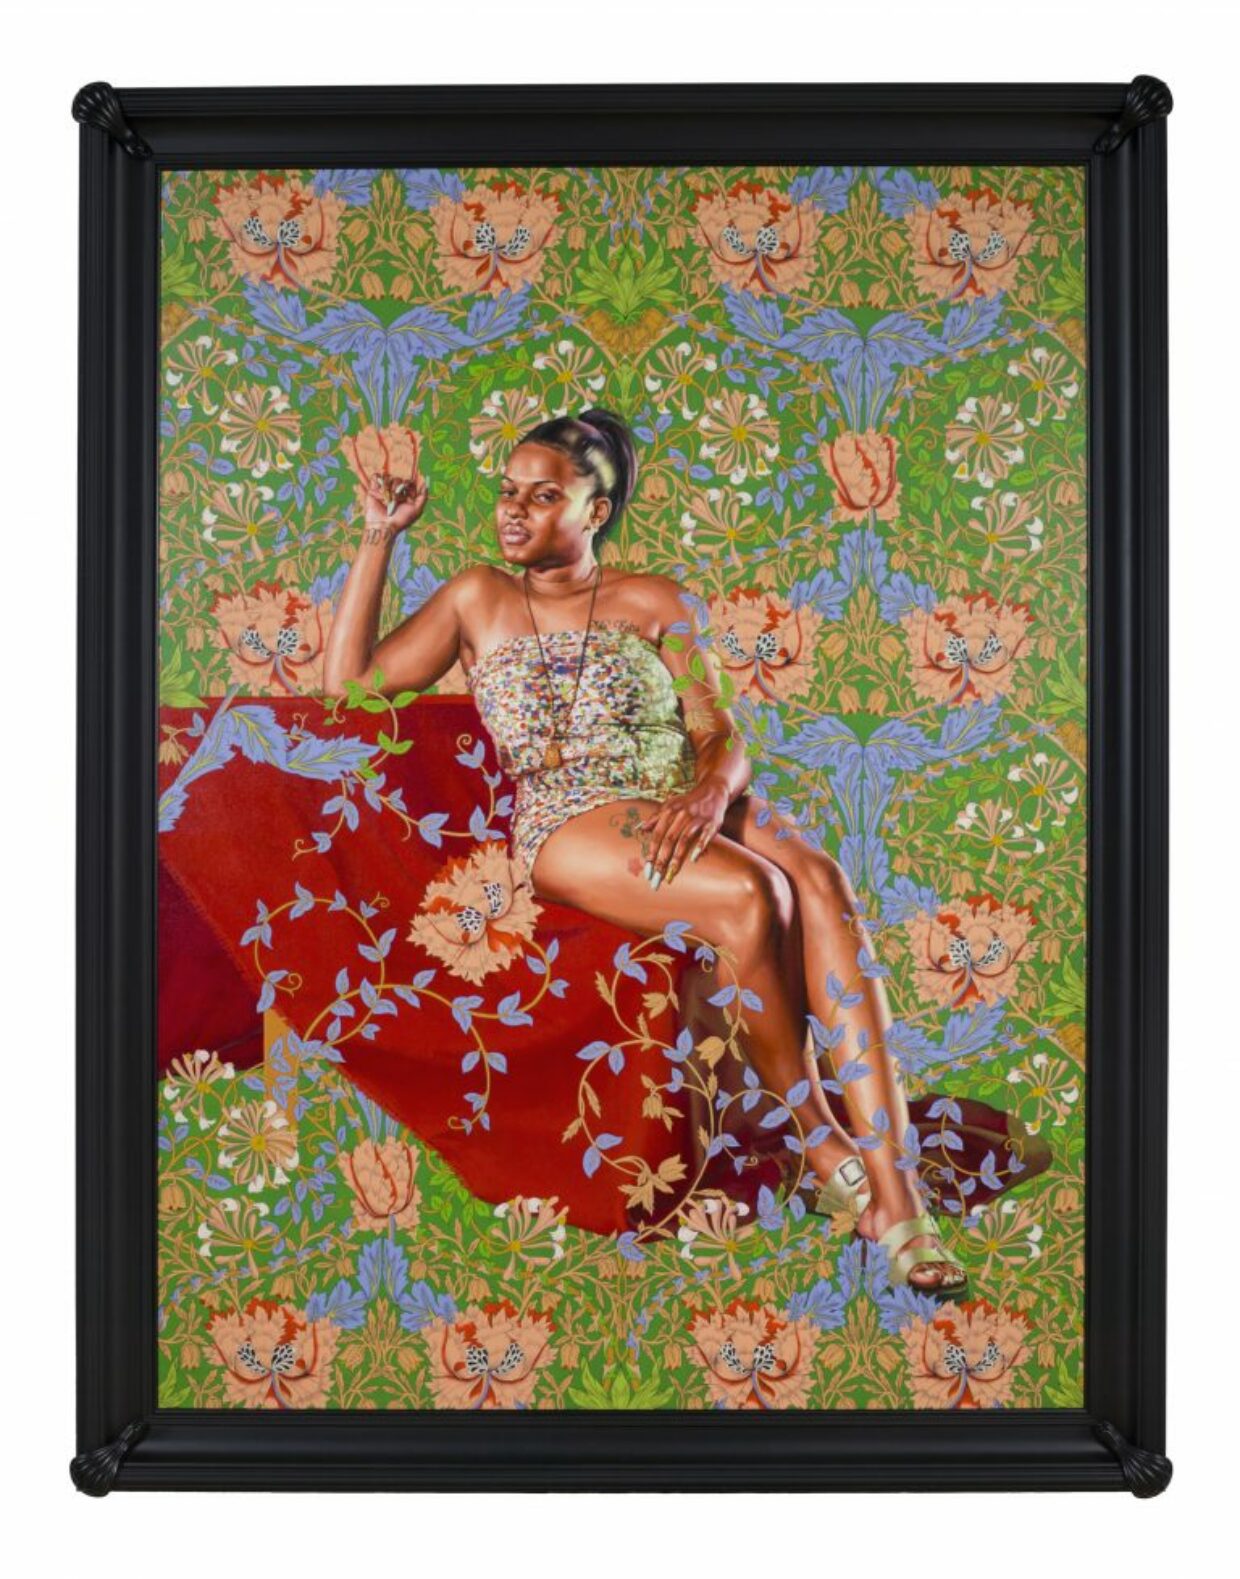 The Yellow Wallpaper is an exhibition of new portraits by American artist Kehinde Wiley | 1